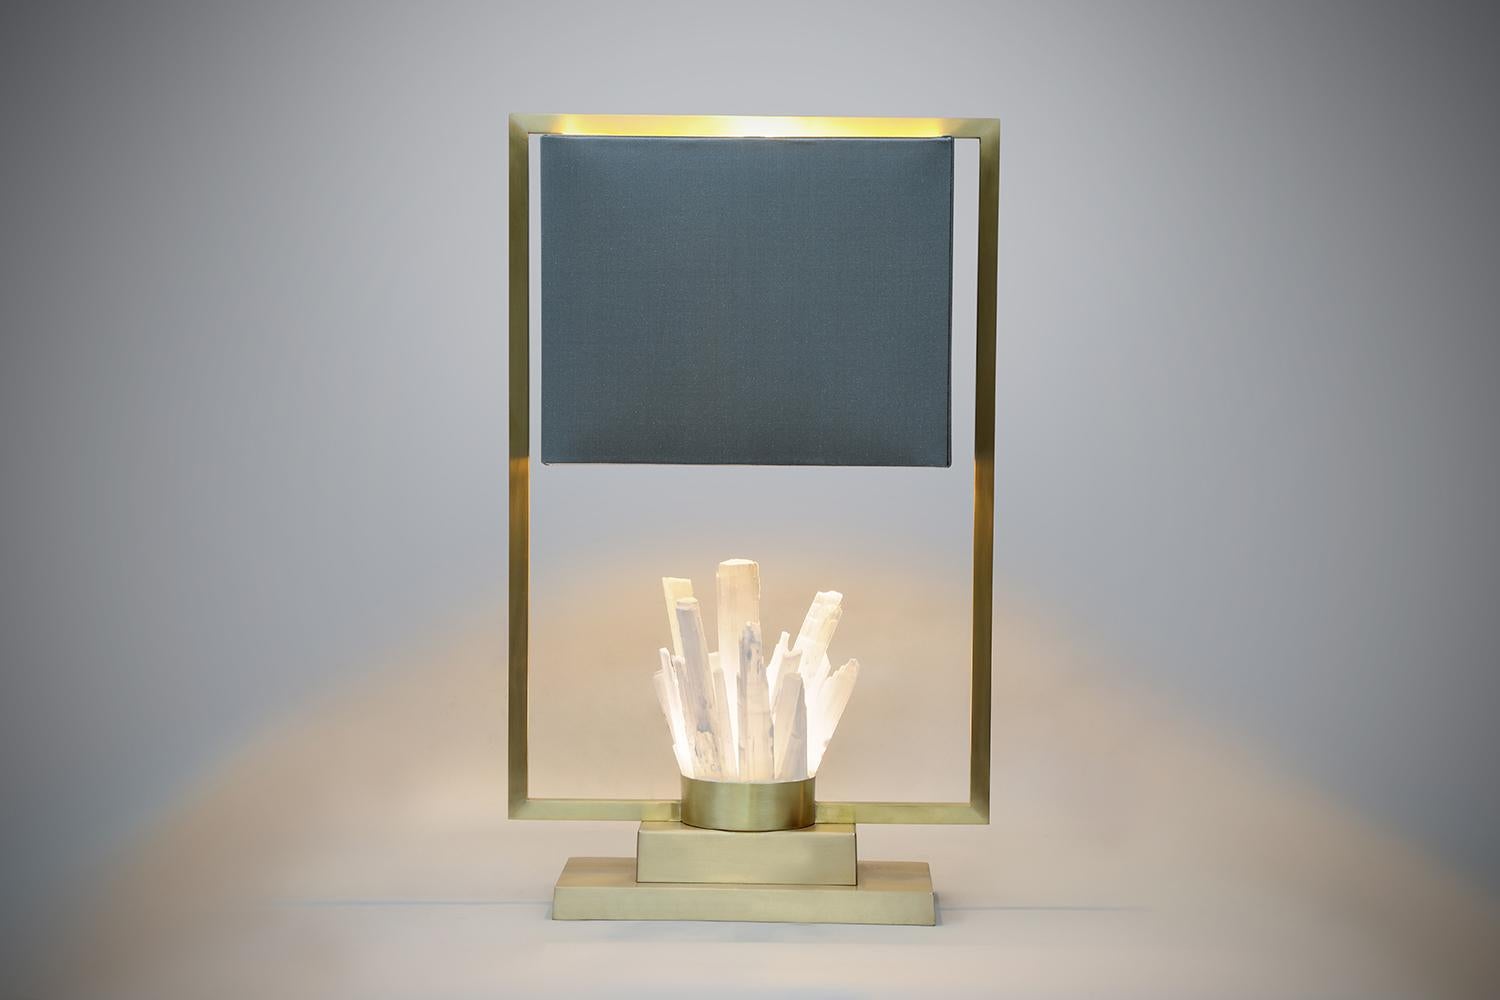 The rawest form of rock crystal rods are the central feature of this beautiful lamp. Uniquely positioned, the shade sits within an outer bronze frame, all delicately handcrafted with the softest of finishes.

Each light is limited in the number ever